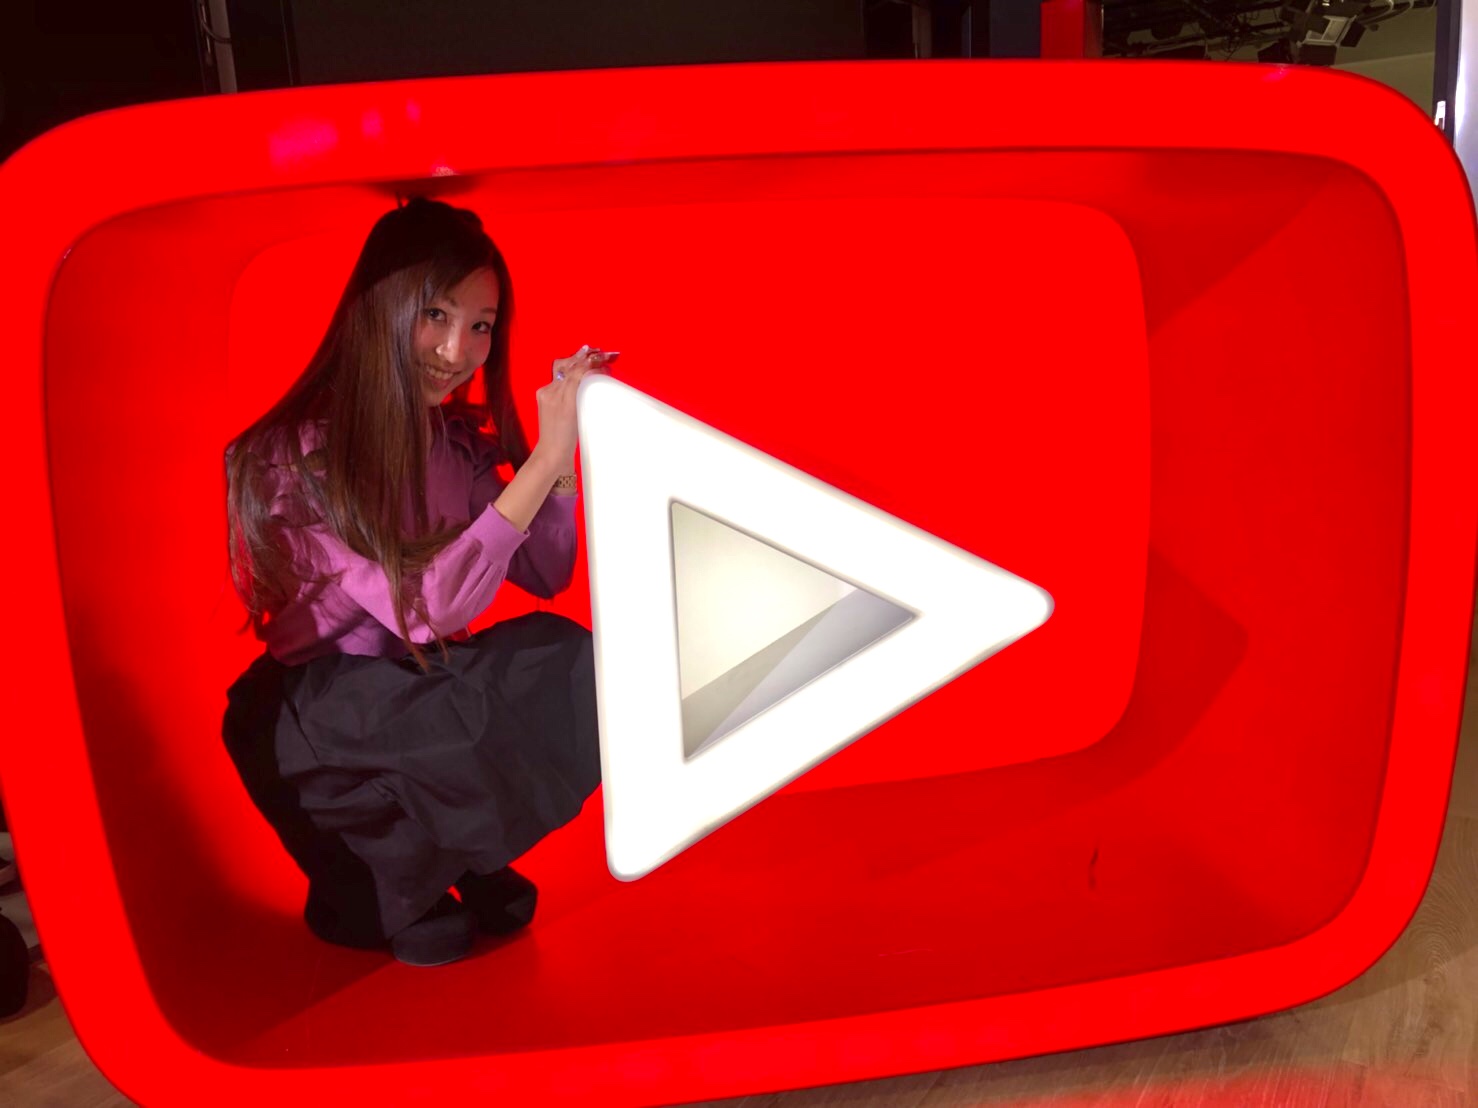 ▲YouTube Space Tokyoにて　